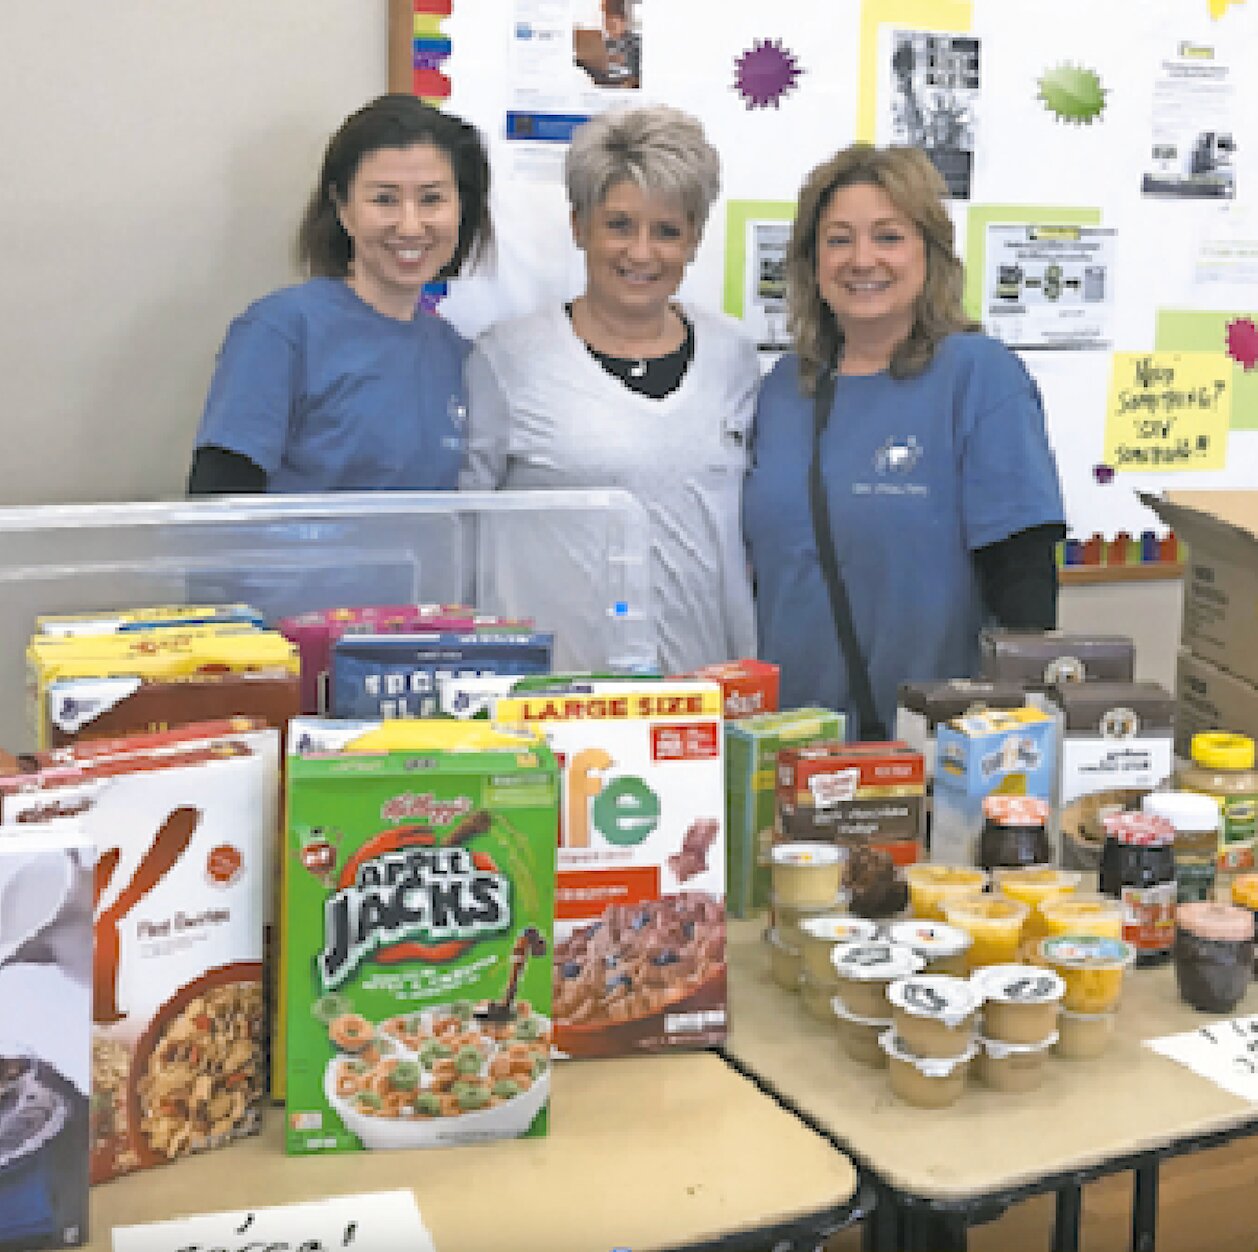 People Loving People serves 175 families each week at the Oyster Bay food pantry. From left are founders Gina Kang, Valerie Monroy and Donna Galgano.